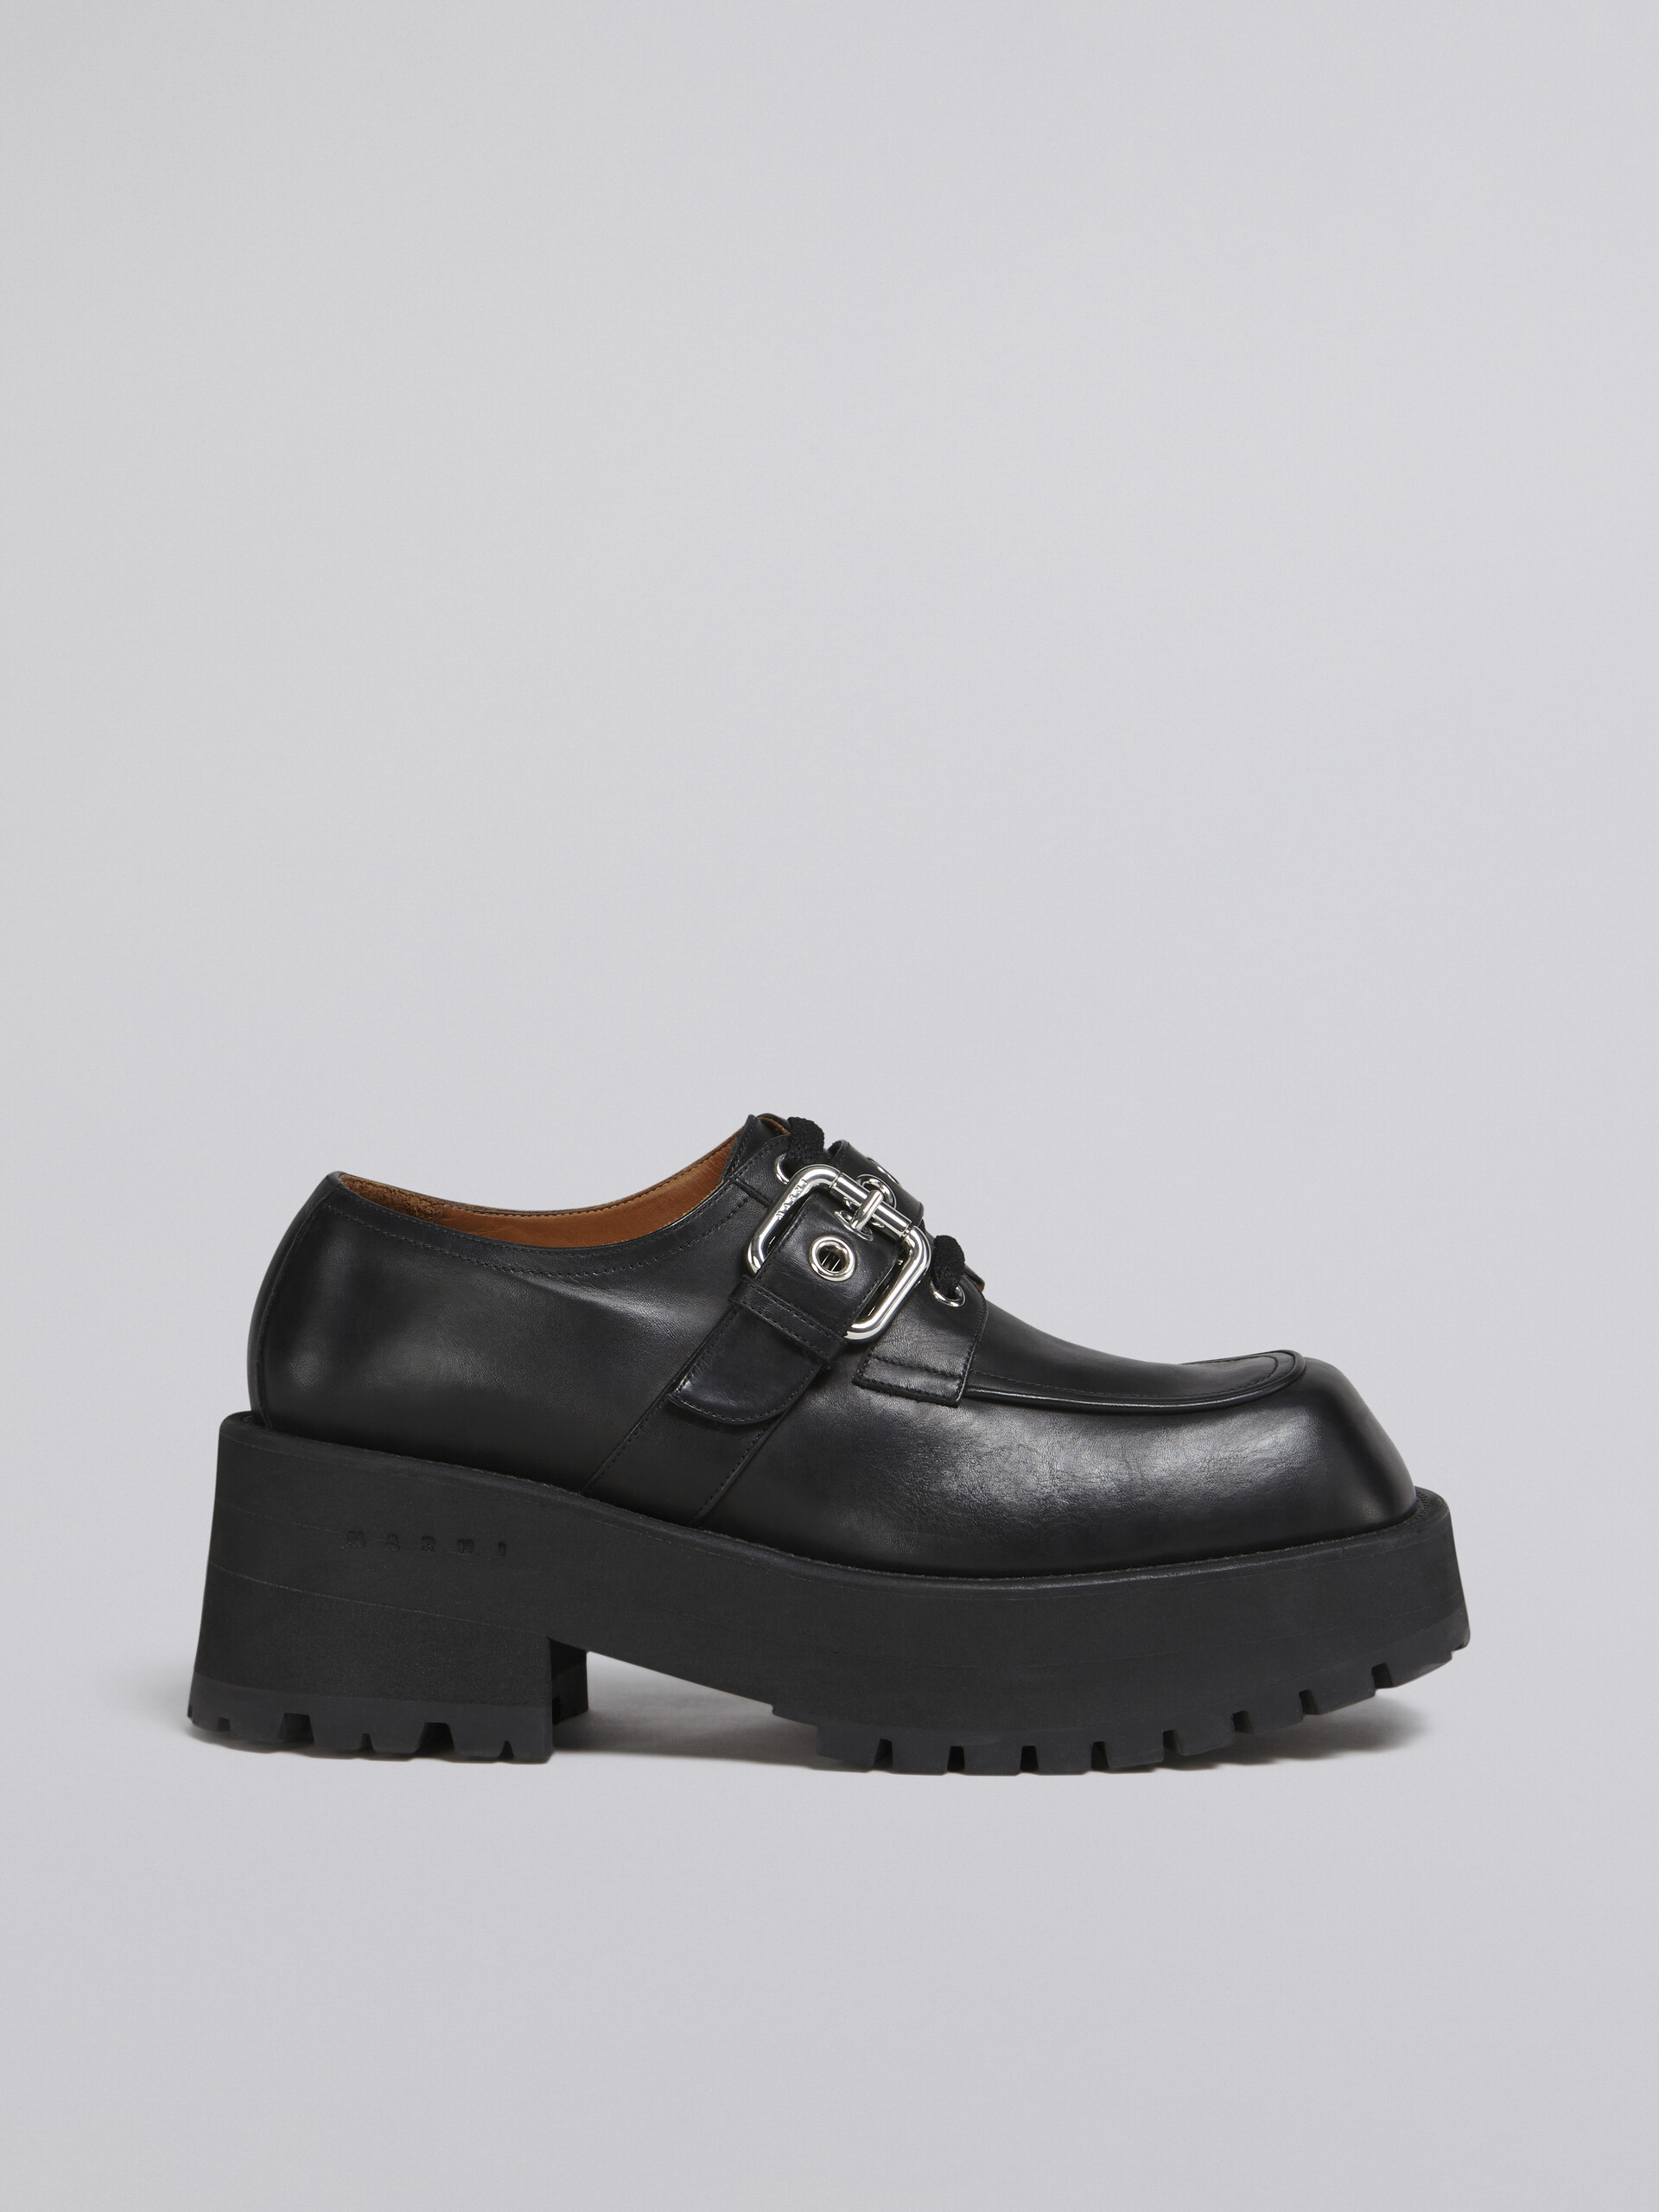 Black soft calf leather moccasin - Lace-ups - Image 1